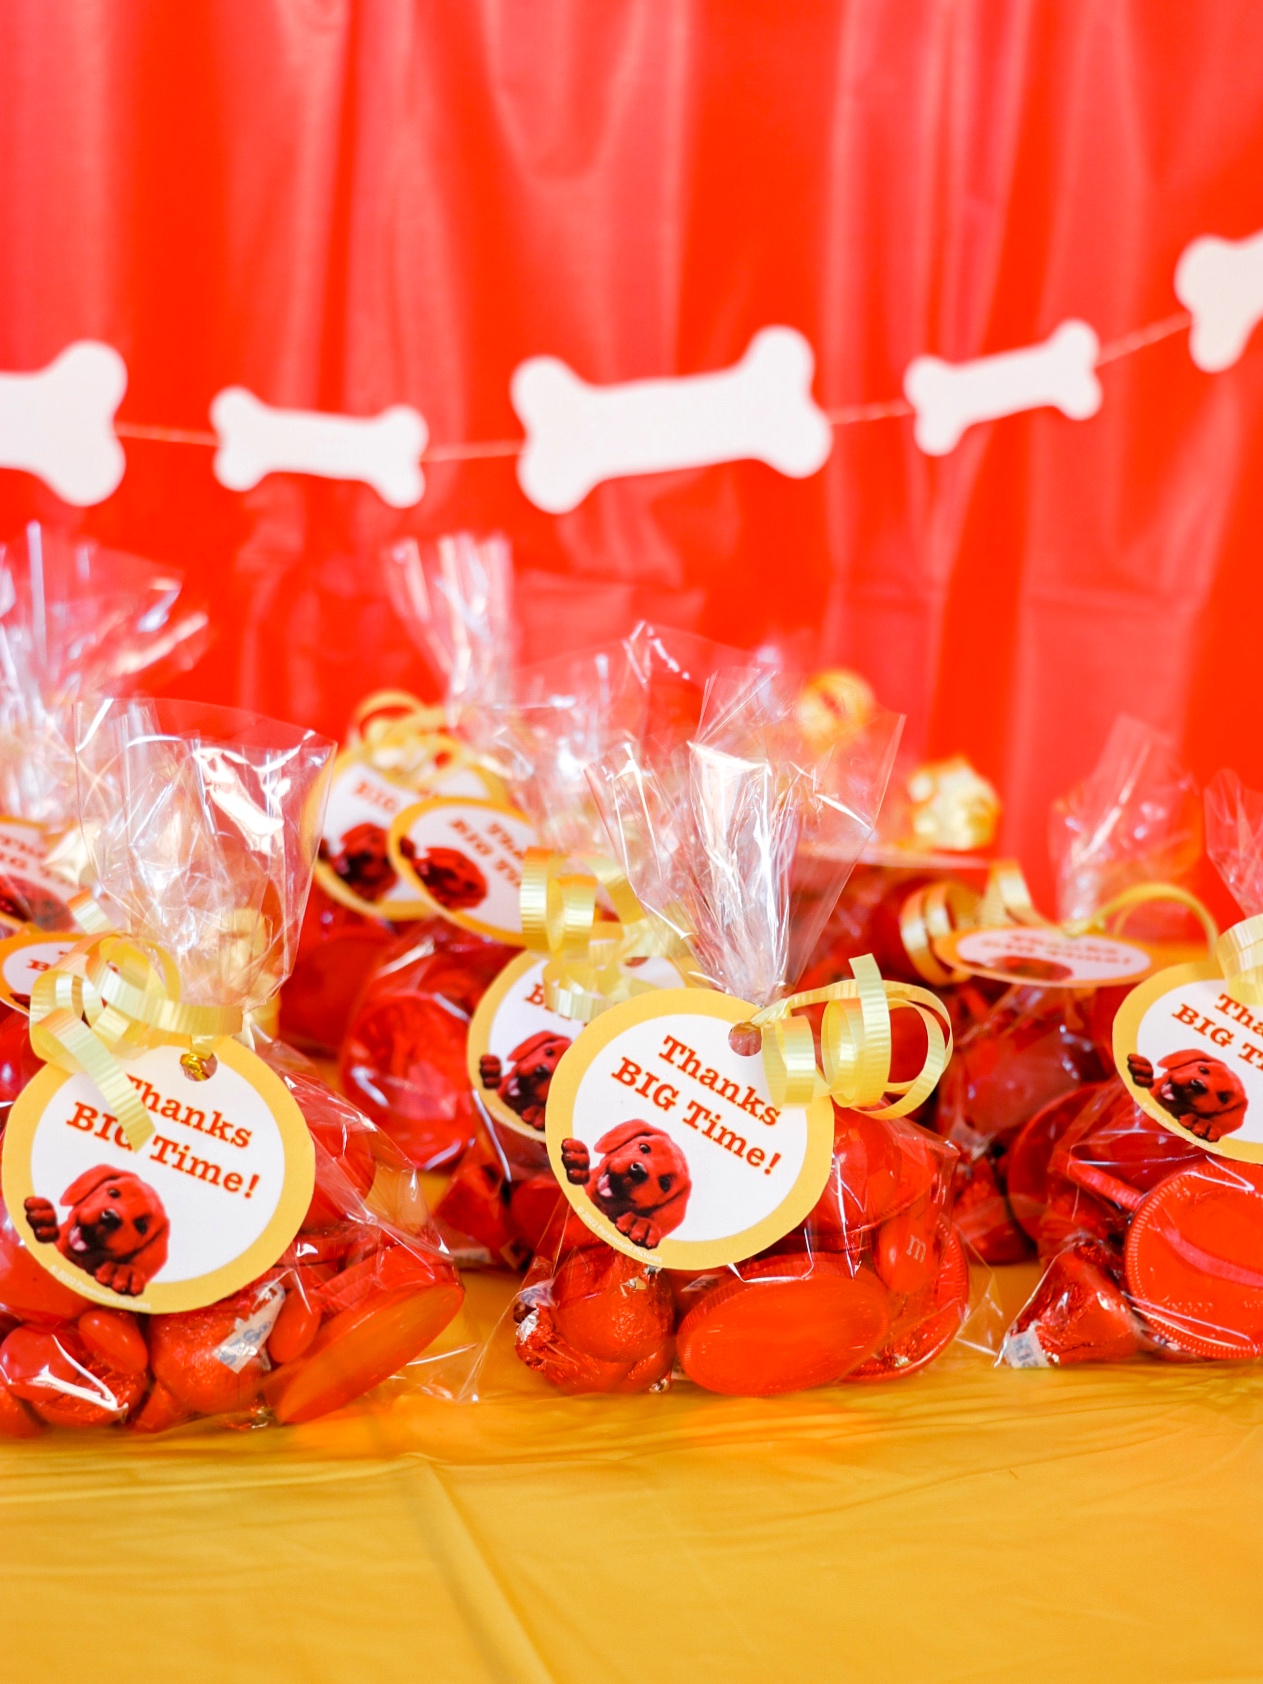 Clifford the Big Red Dog party favors